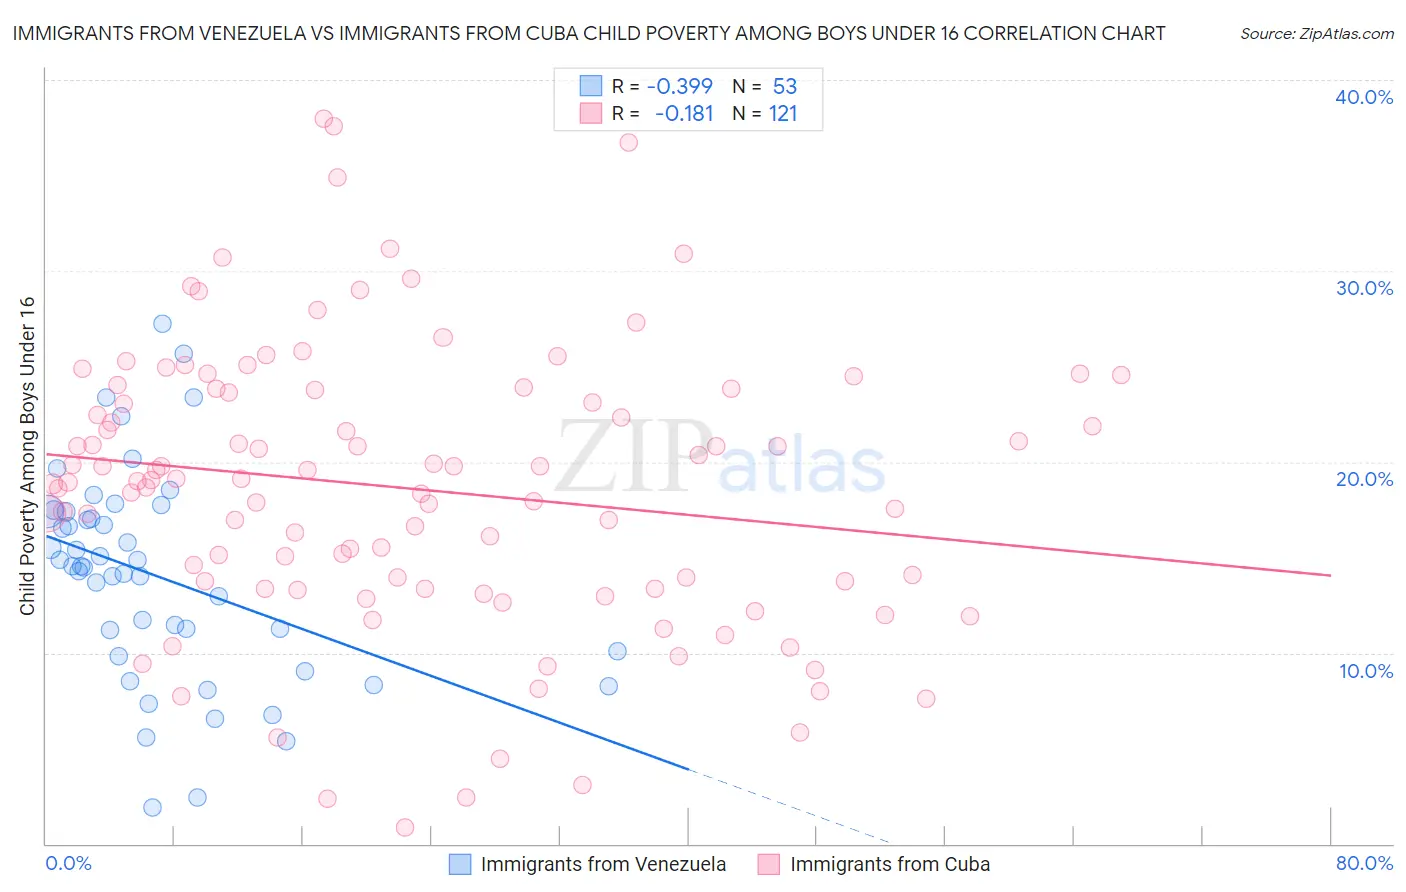 Immigrants from Venezuela vs Immigrants from Cuba Child Poverty Among Boys Under 16